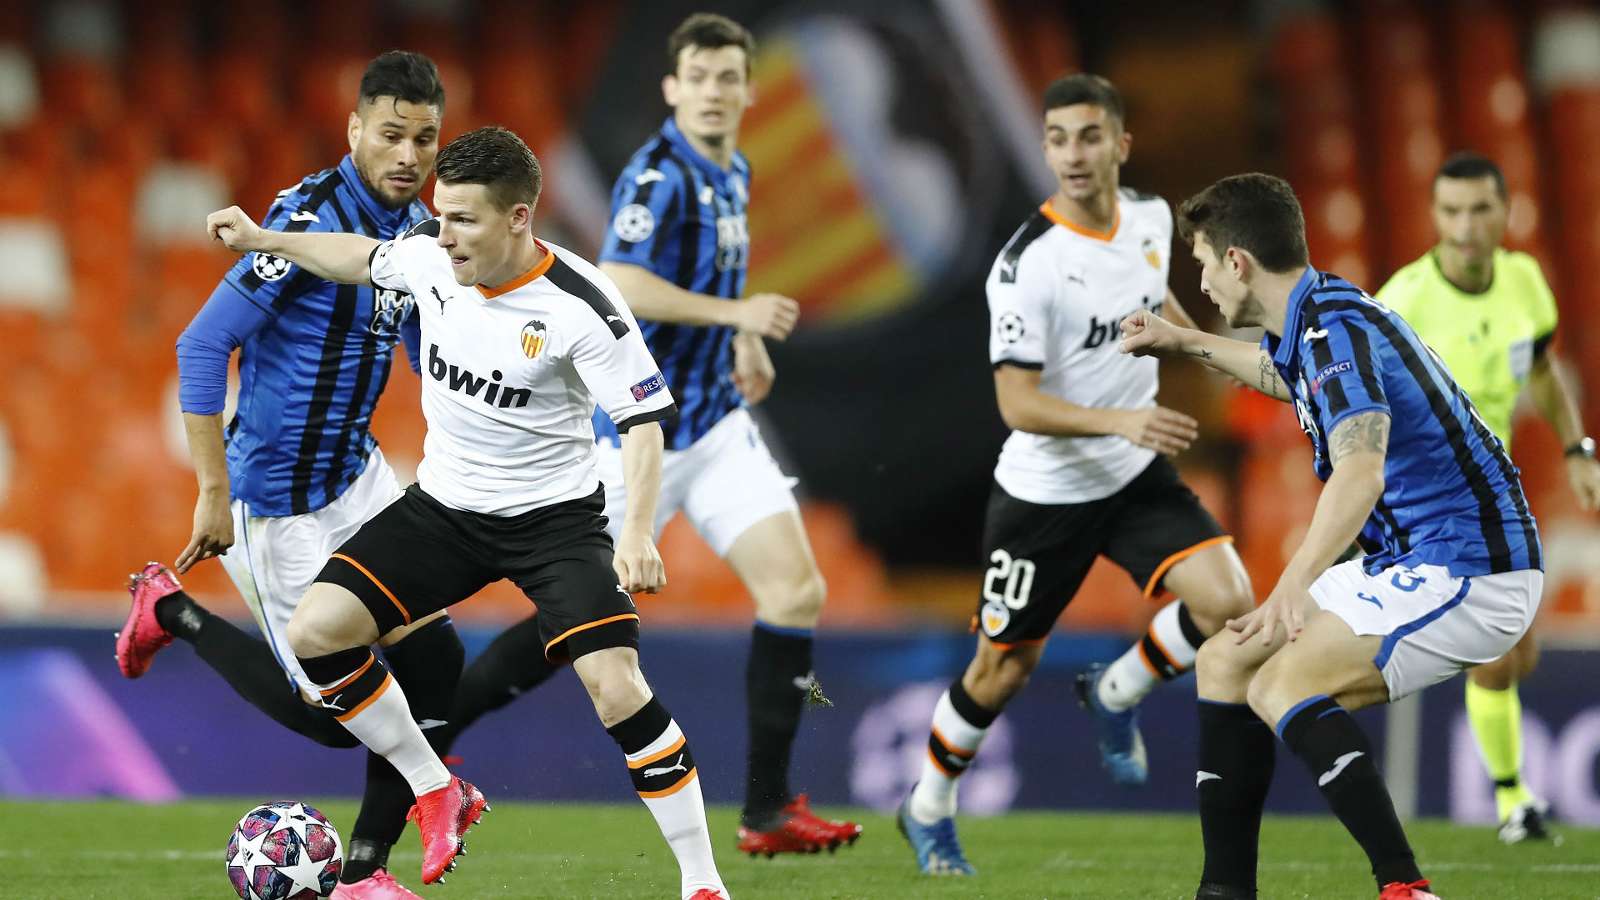 Valencia confirm that 35 per cent of squad has tested positive for coronavirus as club confirms four more cases - Bóng Đá